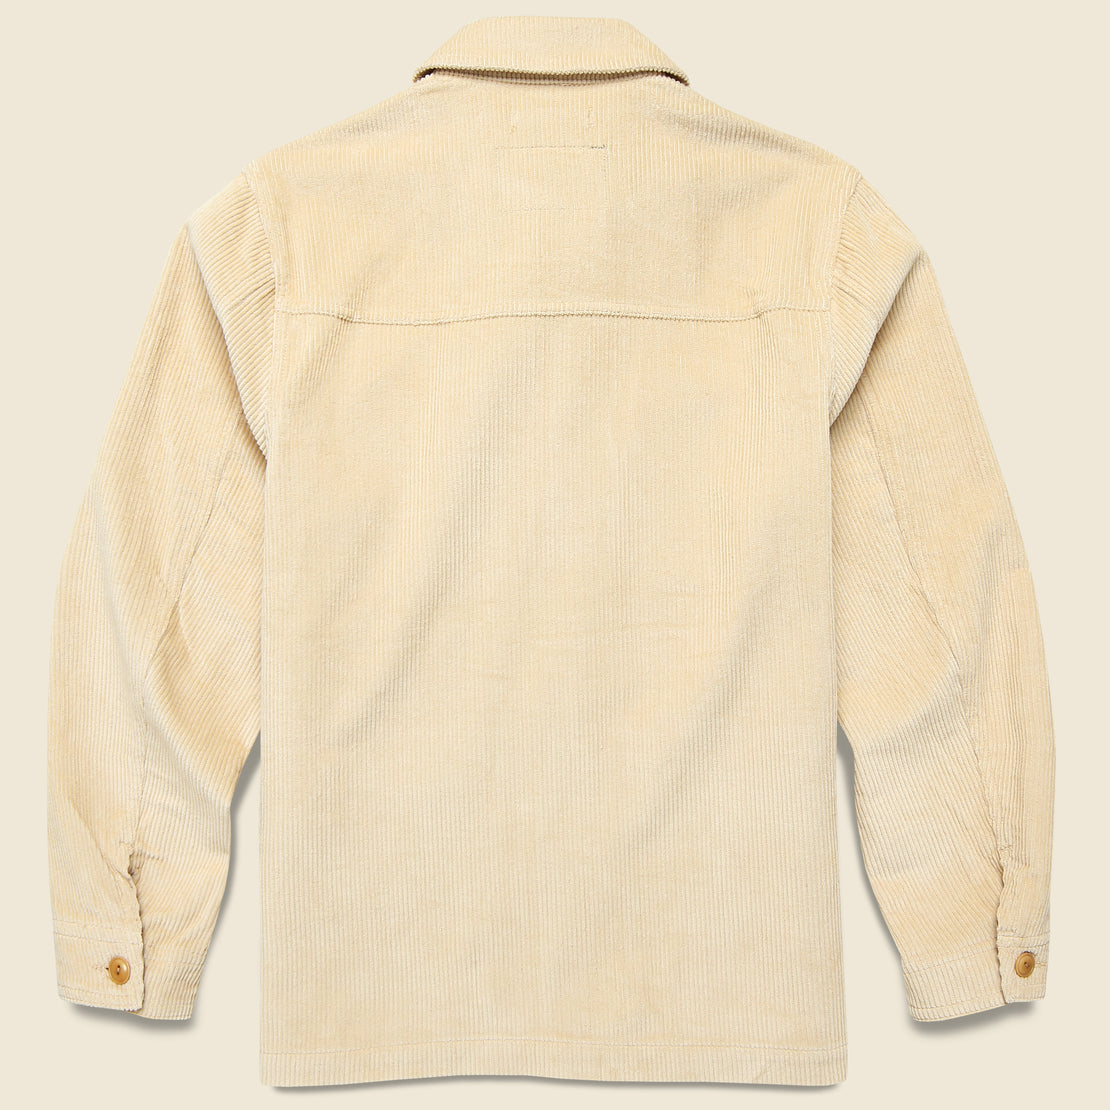 Wale Corduroy Chore Jacket - Off White - Schott - STAG Provisions - Outerwear - Shirt Jacket